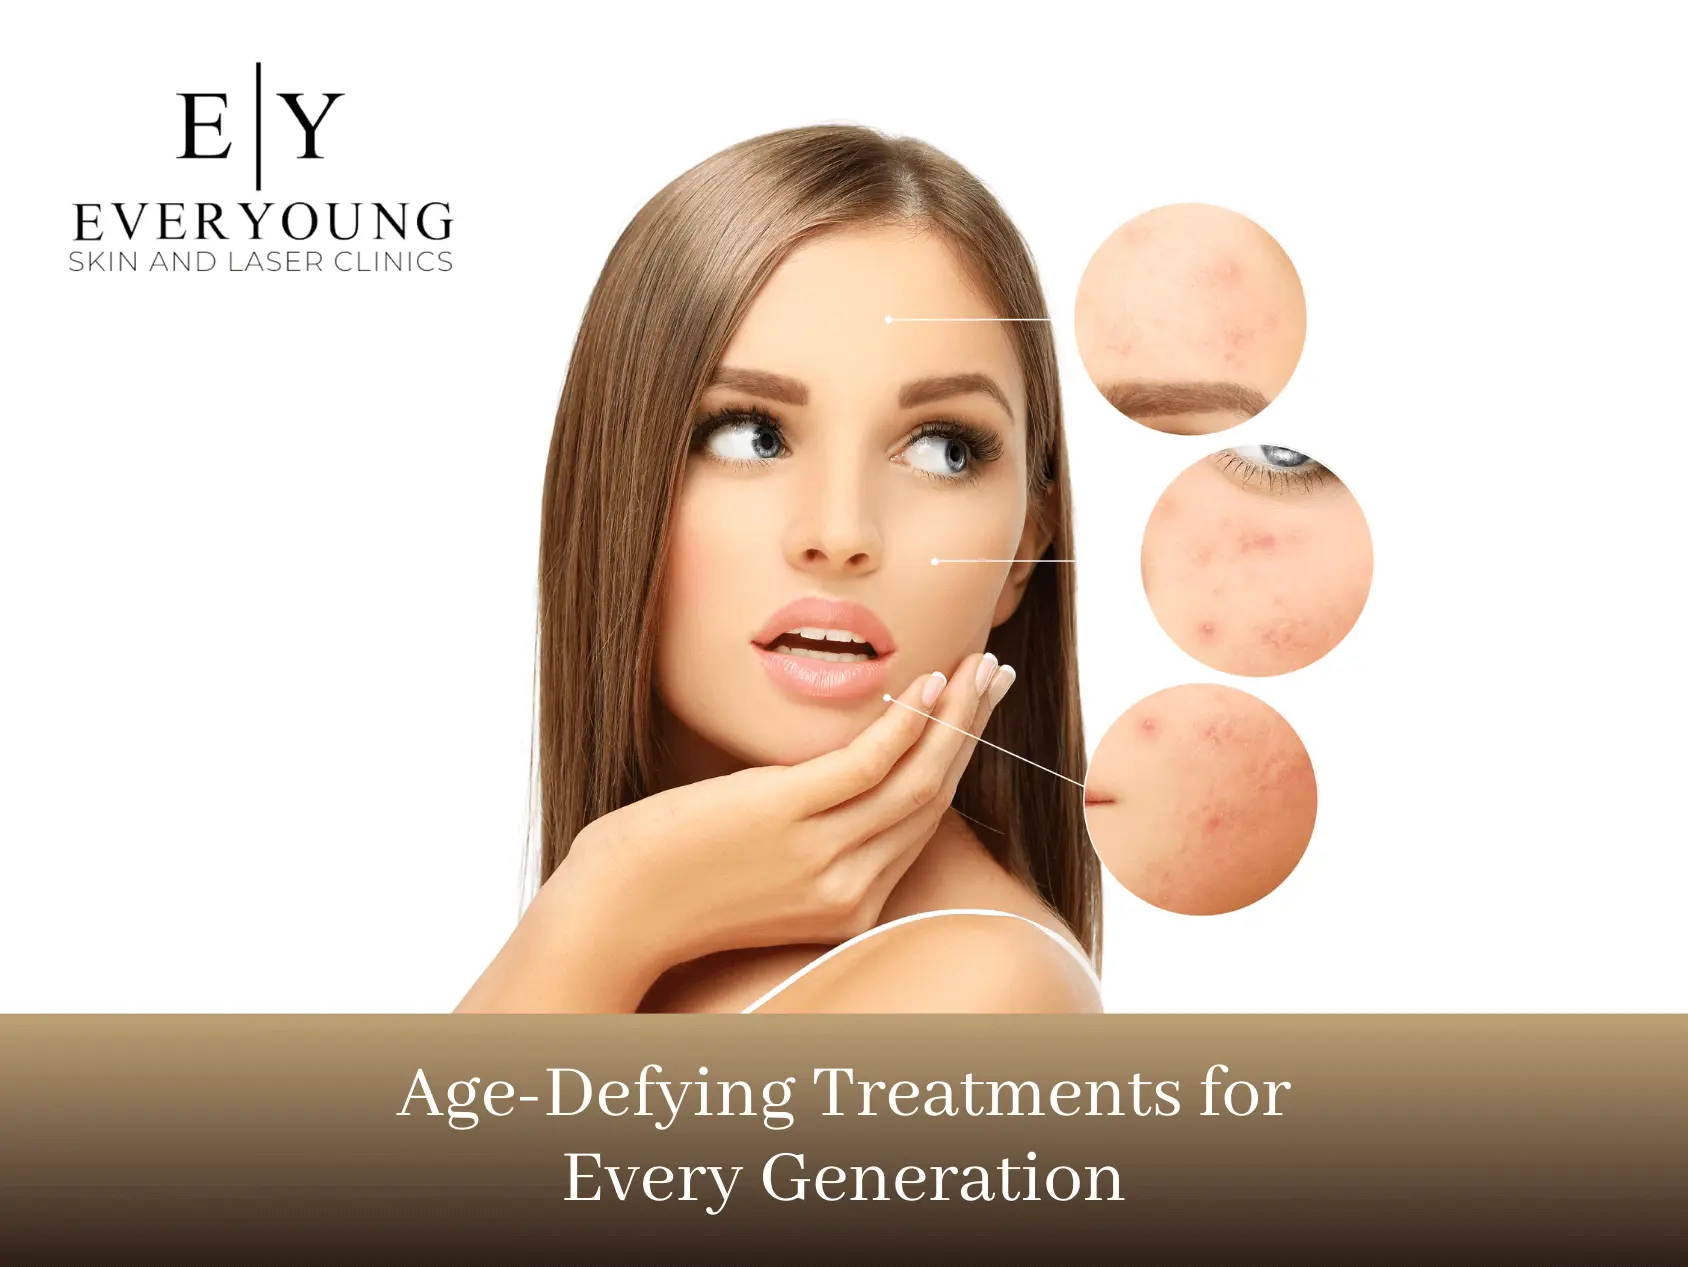 Age defying treatments for every generation